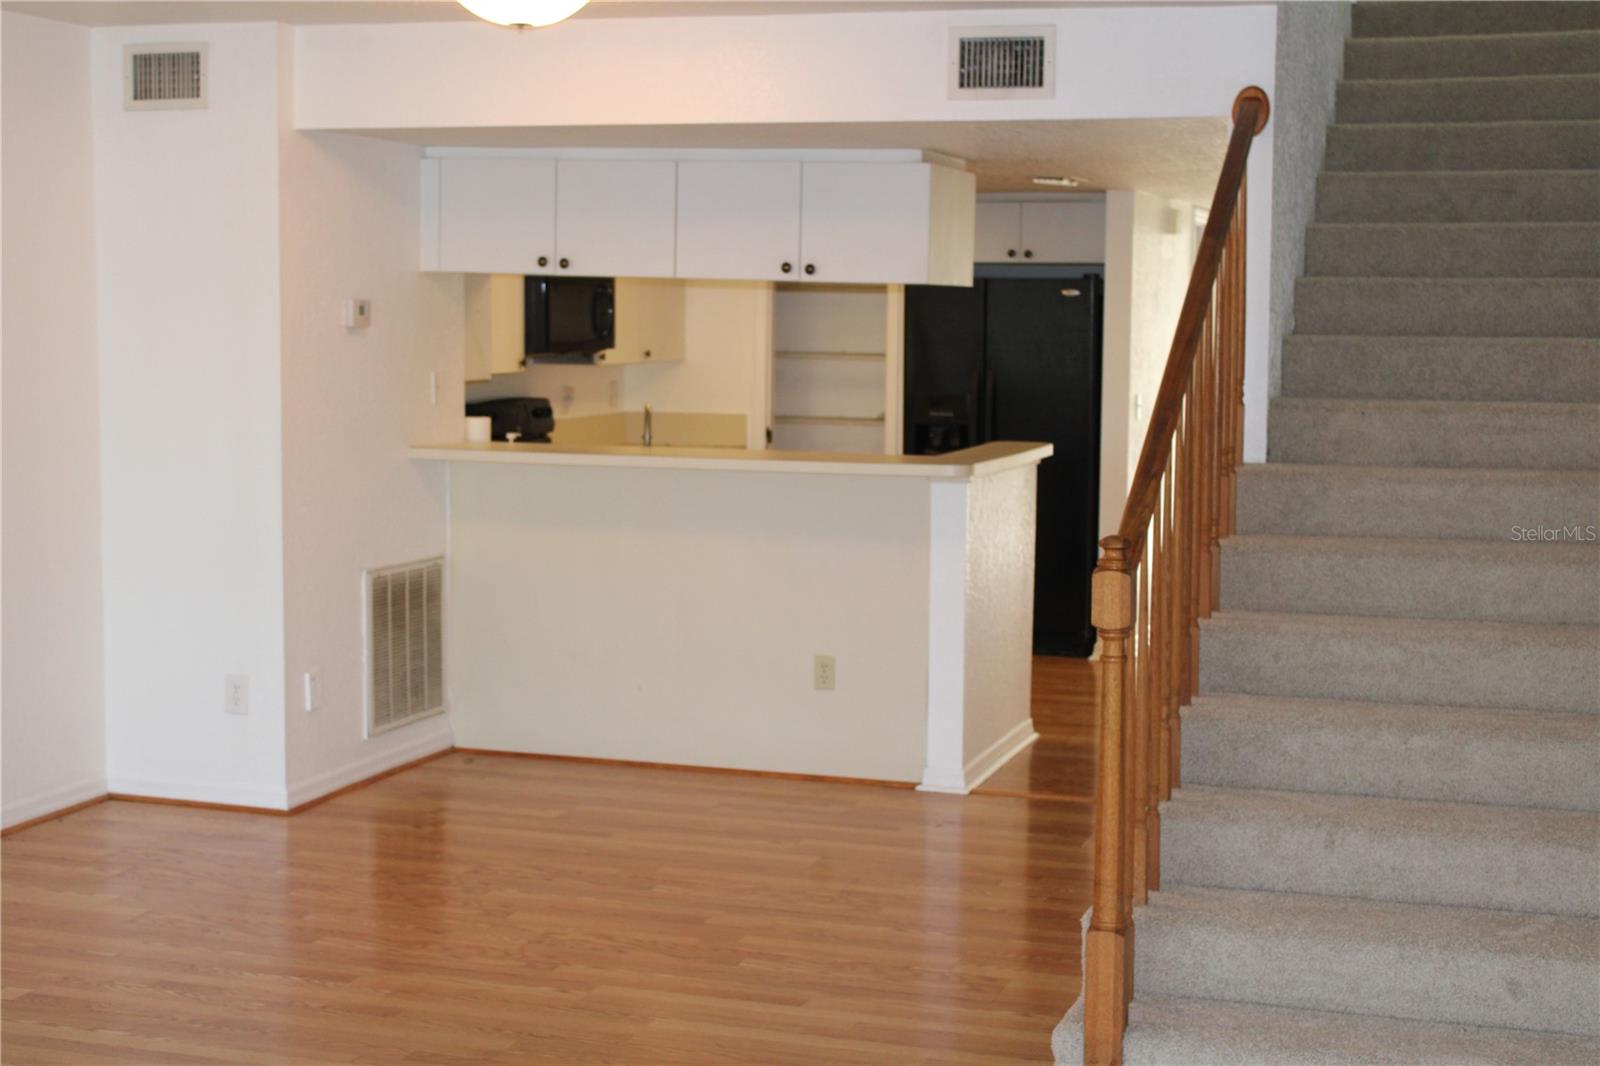 Kitchen and dining area with stairs to third floor